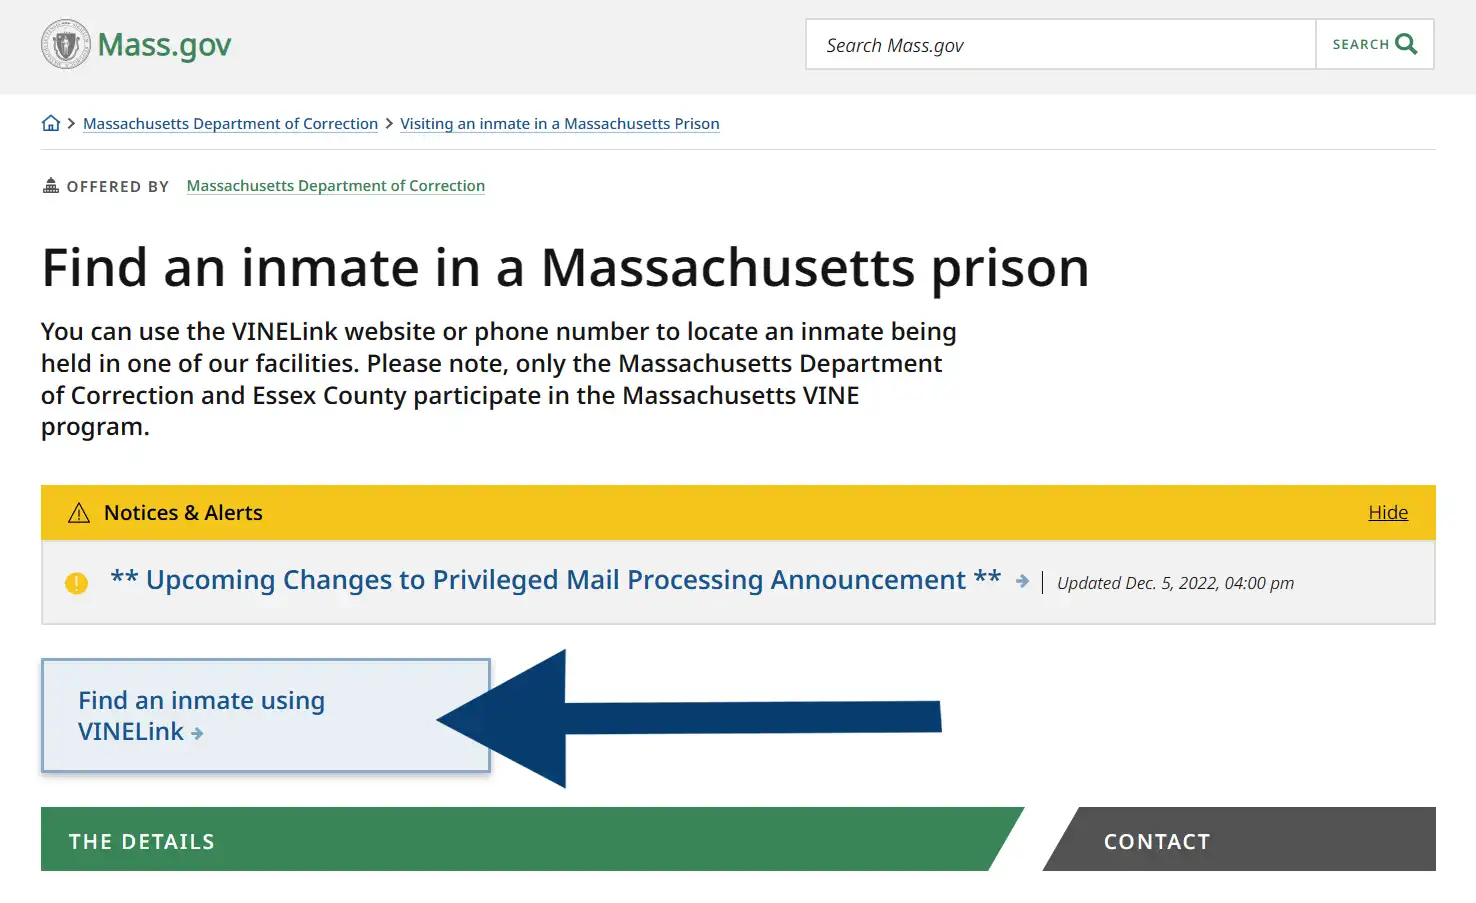 A screenshot from the official website of the commonwealth of Massachusetts' find an inmate in a Massachusetts prison page showing an arrow pointing at the find an inmate using vinelink button.